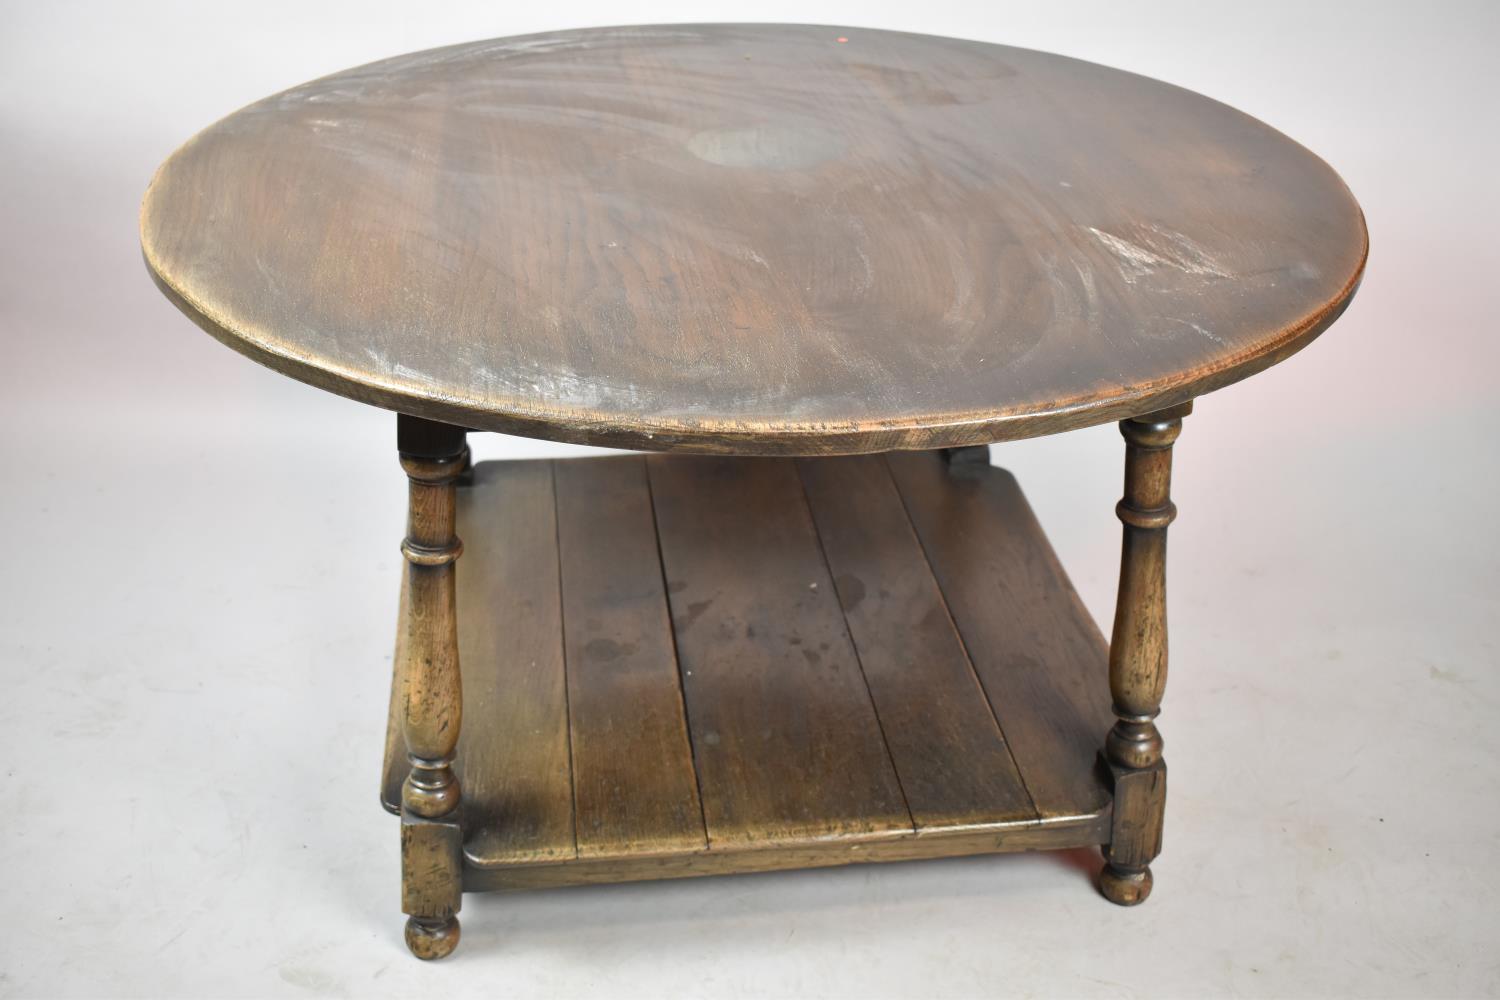 A Mid 20th Century Circular Topped Oak Centre Coffee Table with Square Stretcher Shelf, Water Damage